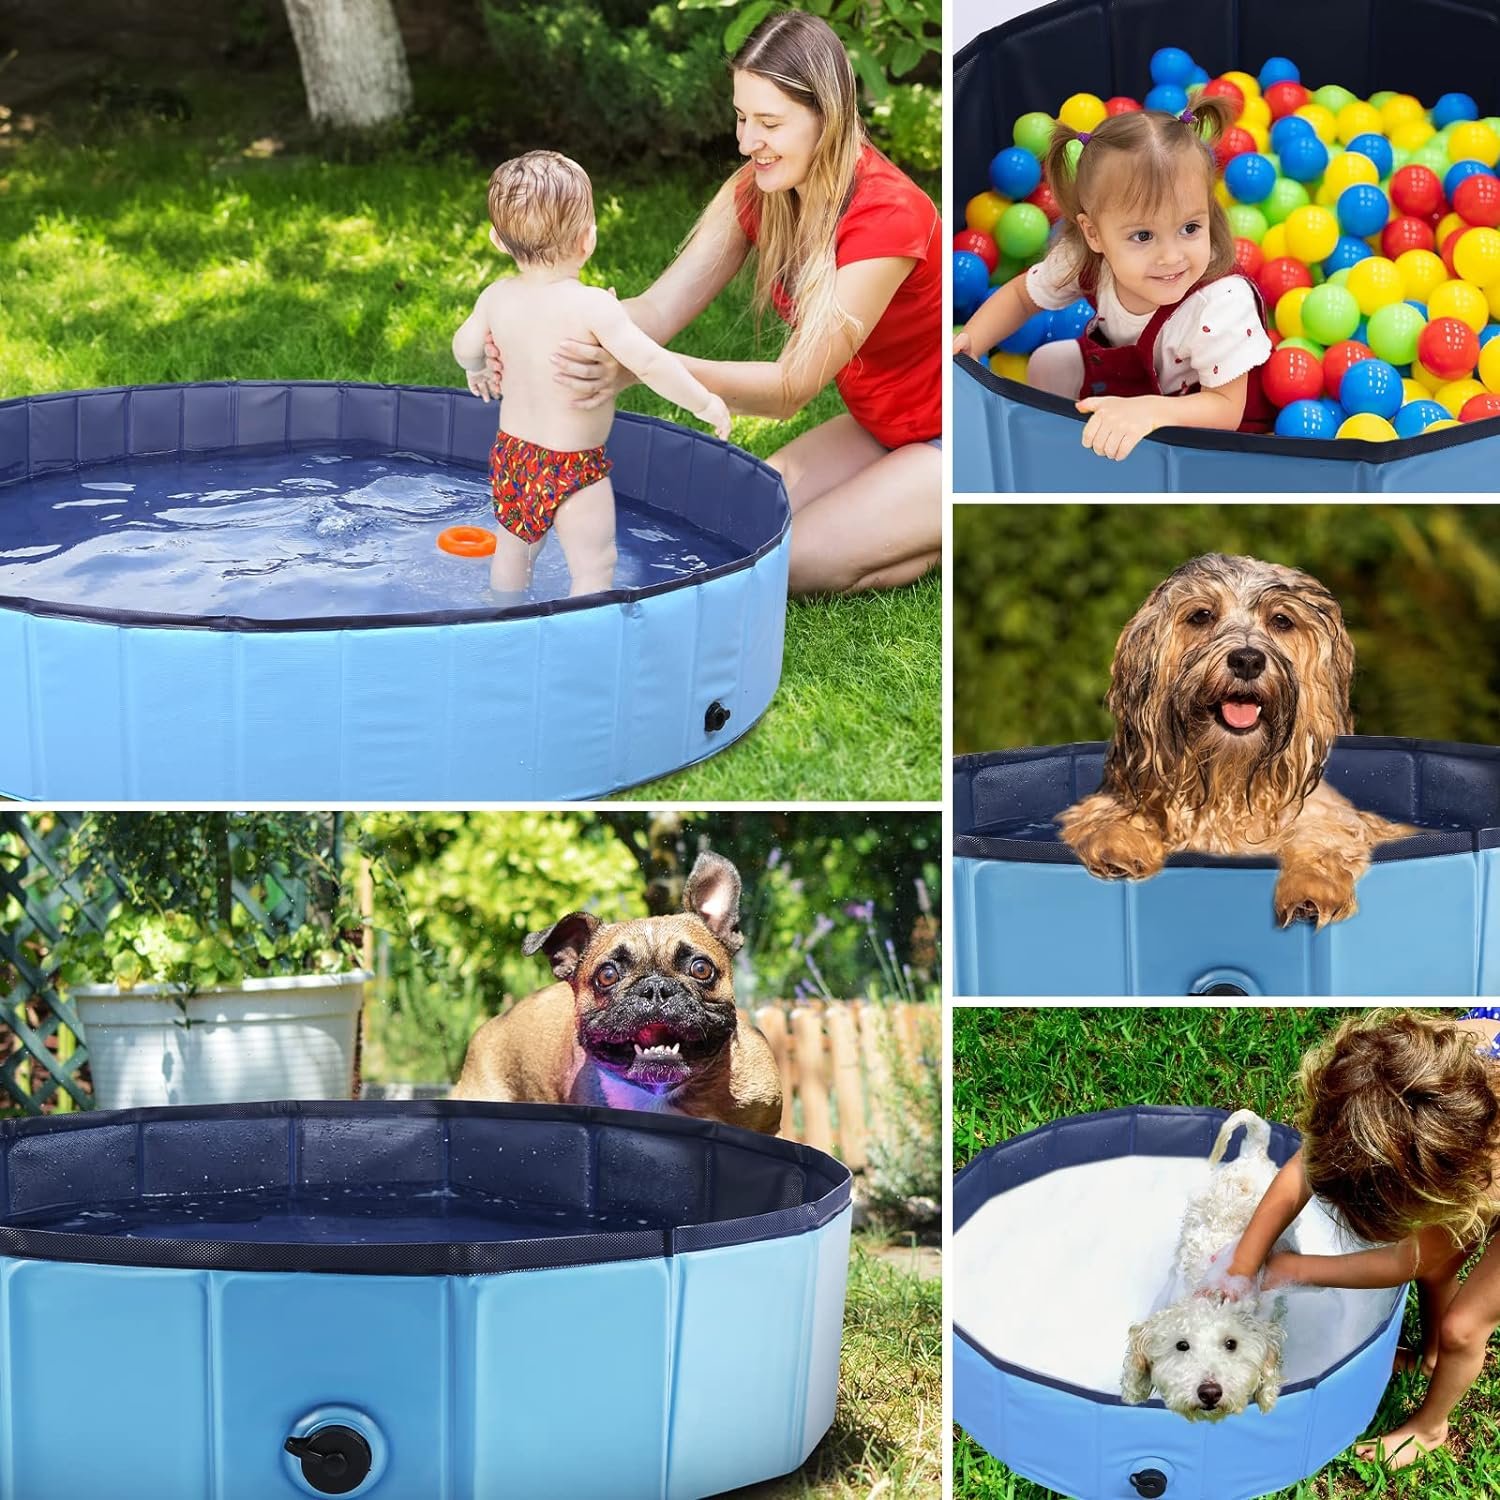 Eooqi Foldable Dog Bath Swimming Pool Plastic Kiddie Pool Professional Tub Collapsible Grooming Bathtub for Pets Kids Baby and Toddler, 32 x 8 Inches Blue